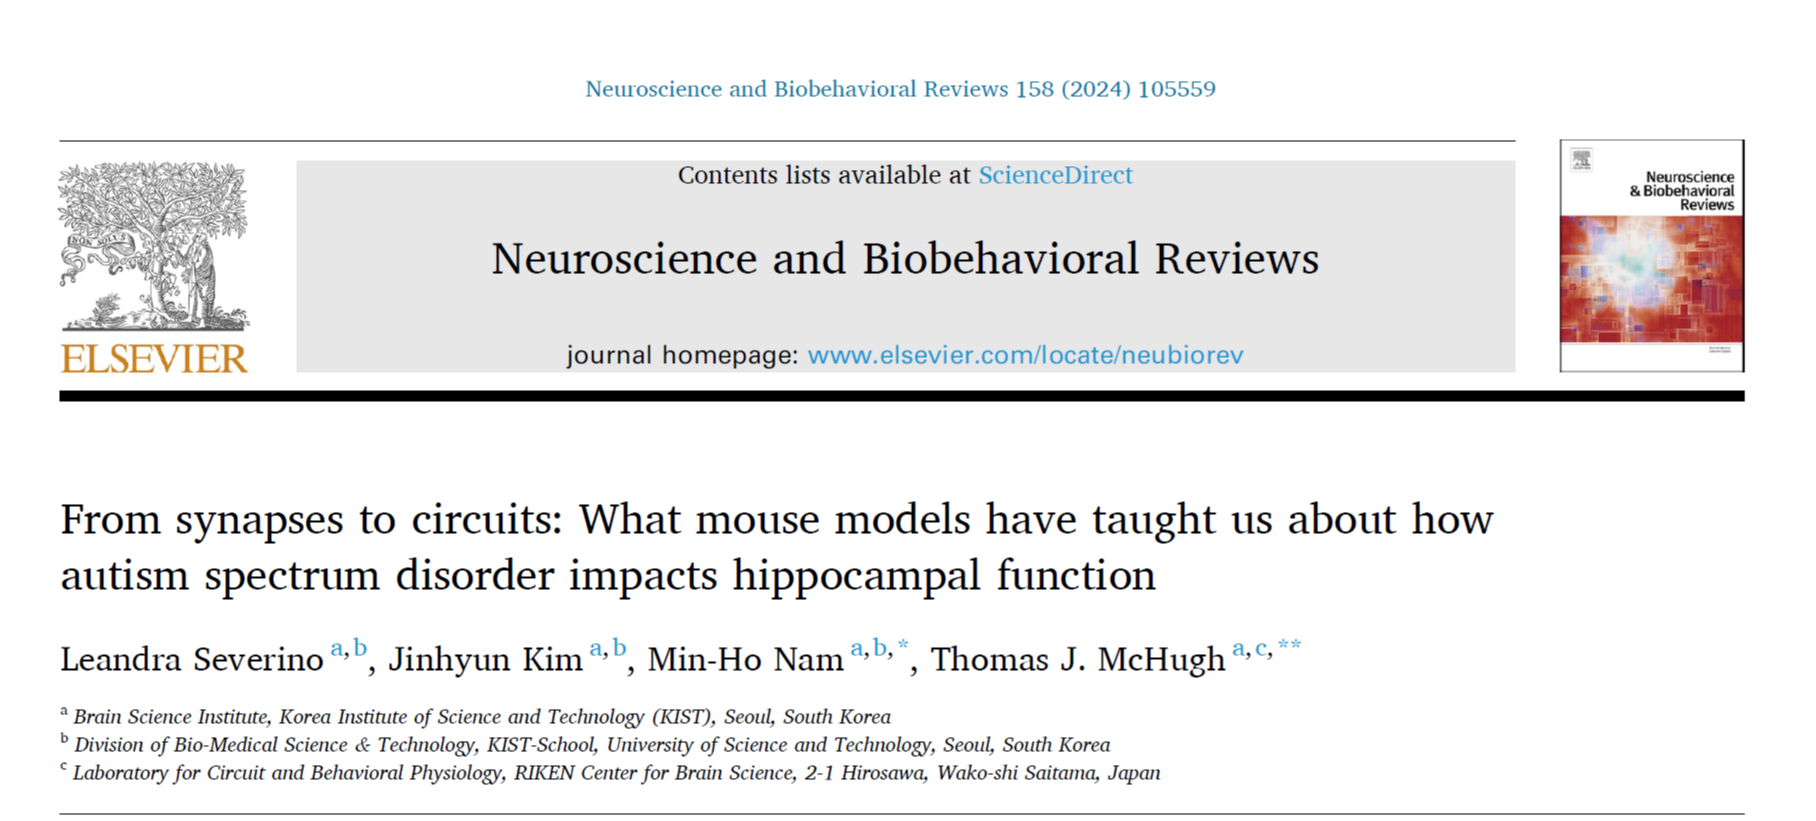 Our new paper is published in Neuroscience and Biobehavioral Reviews!